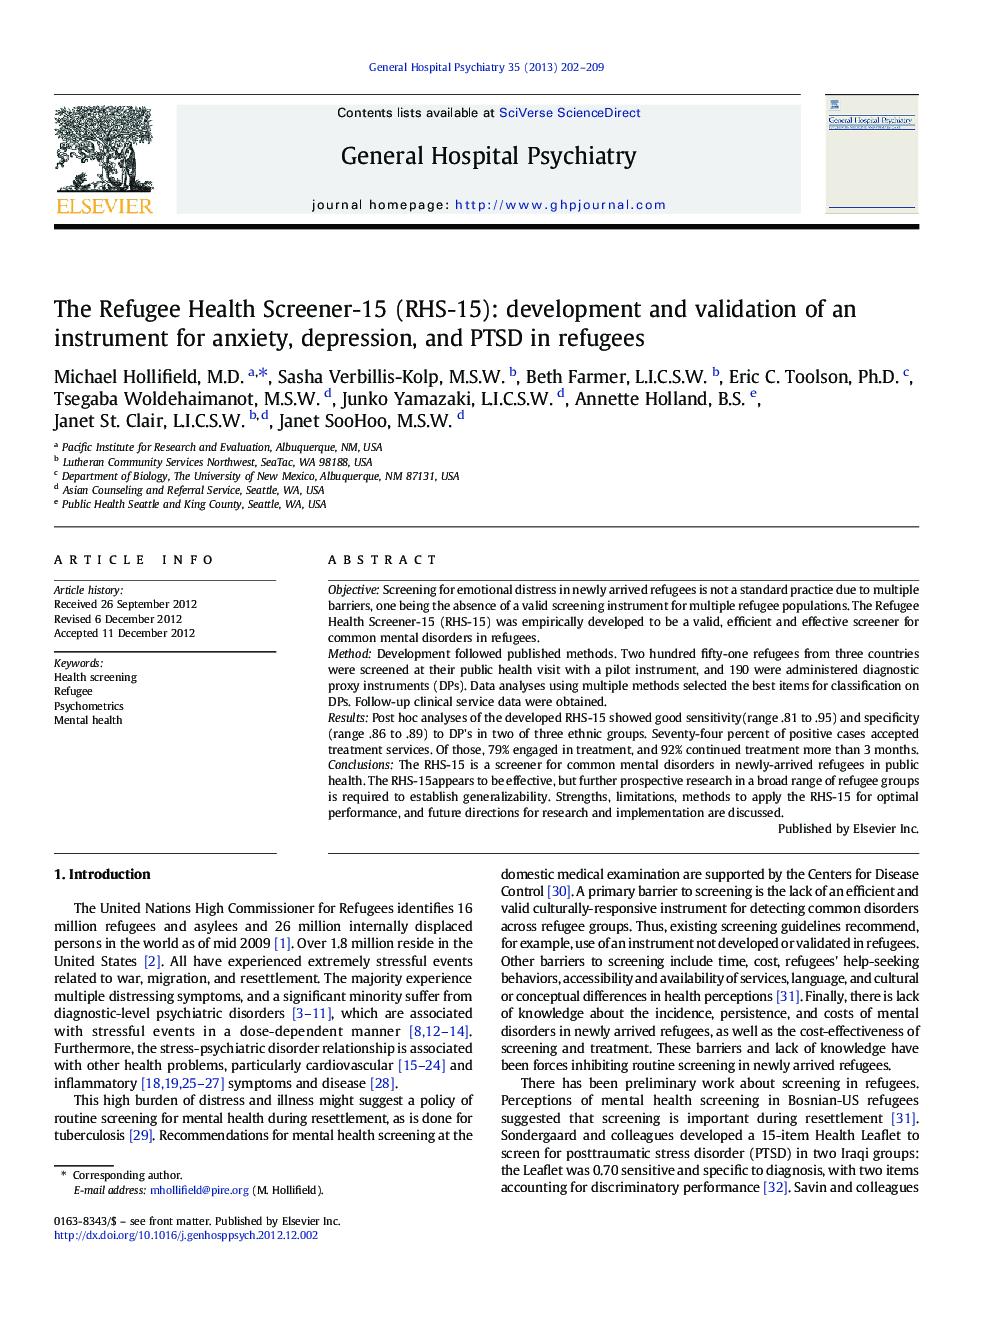 The Refugee Health Screener-15 (RHS-15): development and validation of an instrument for anxiety, depression, and PTSD in refugees